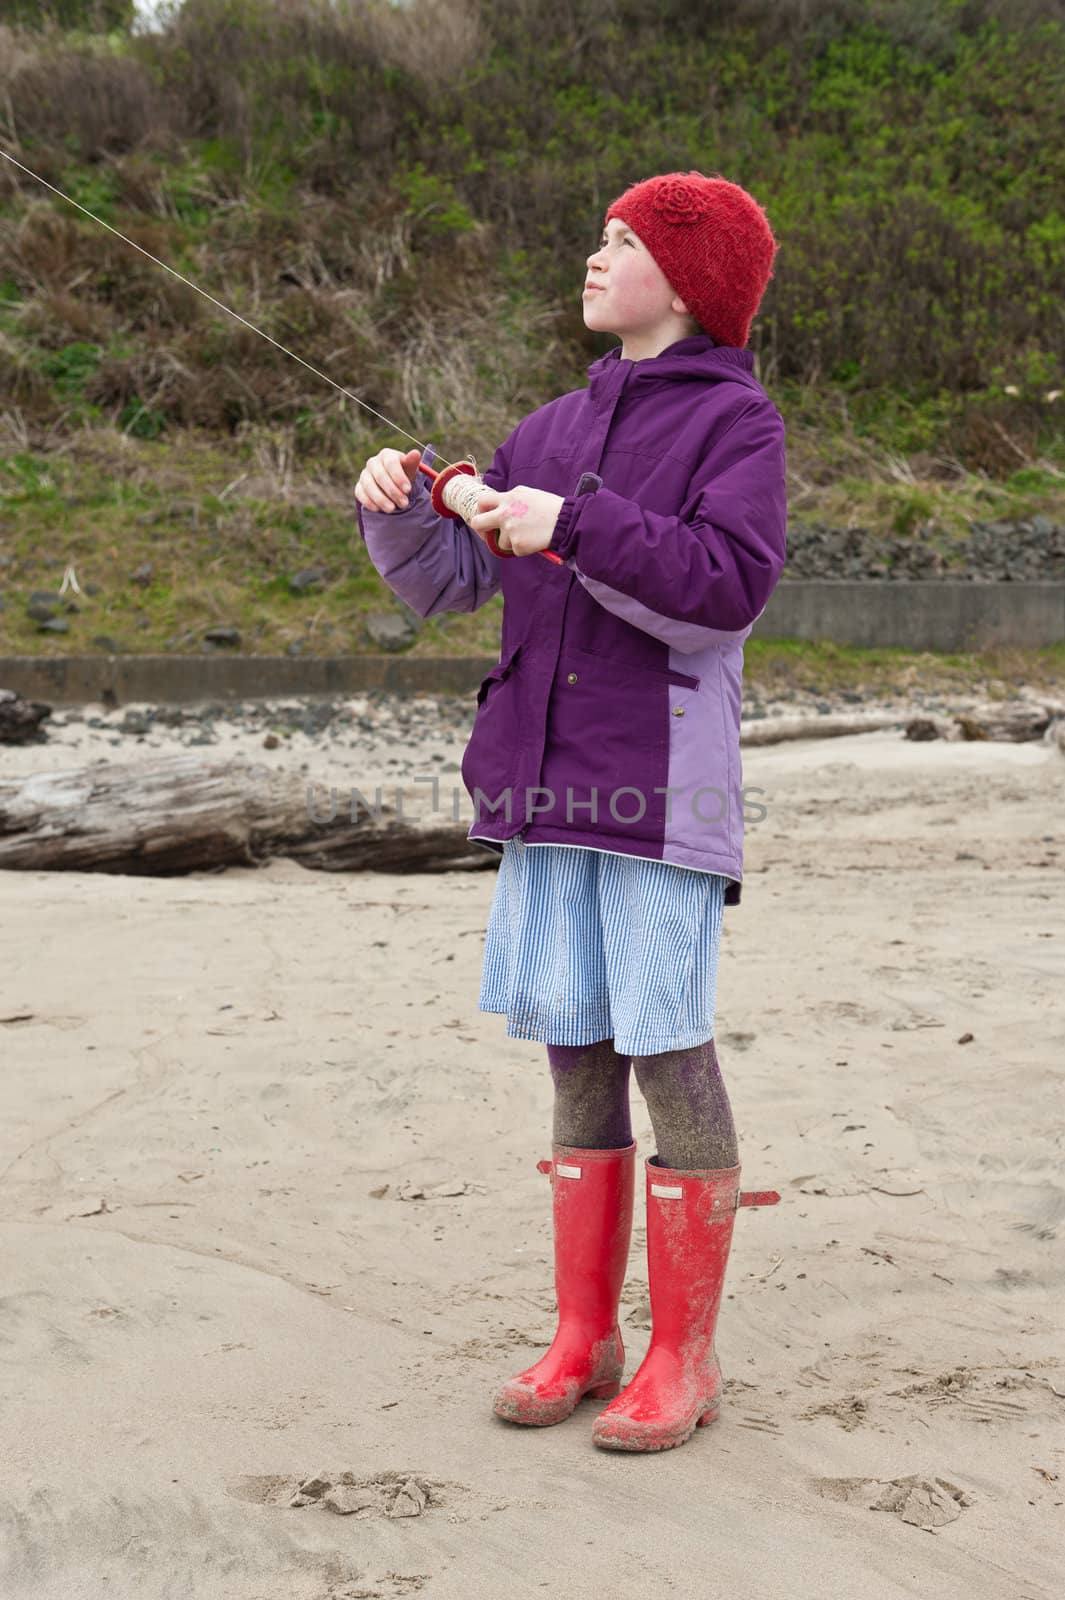 young girl flying kit on beach by rongreer